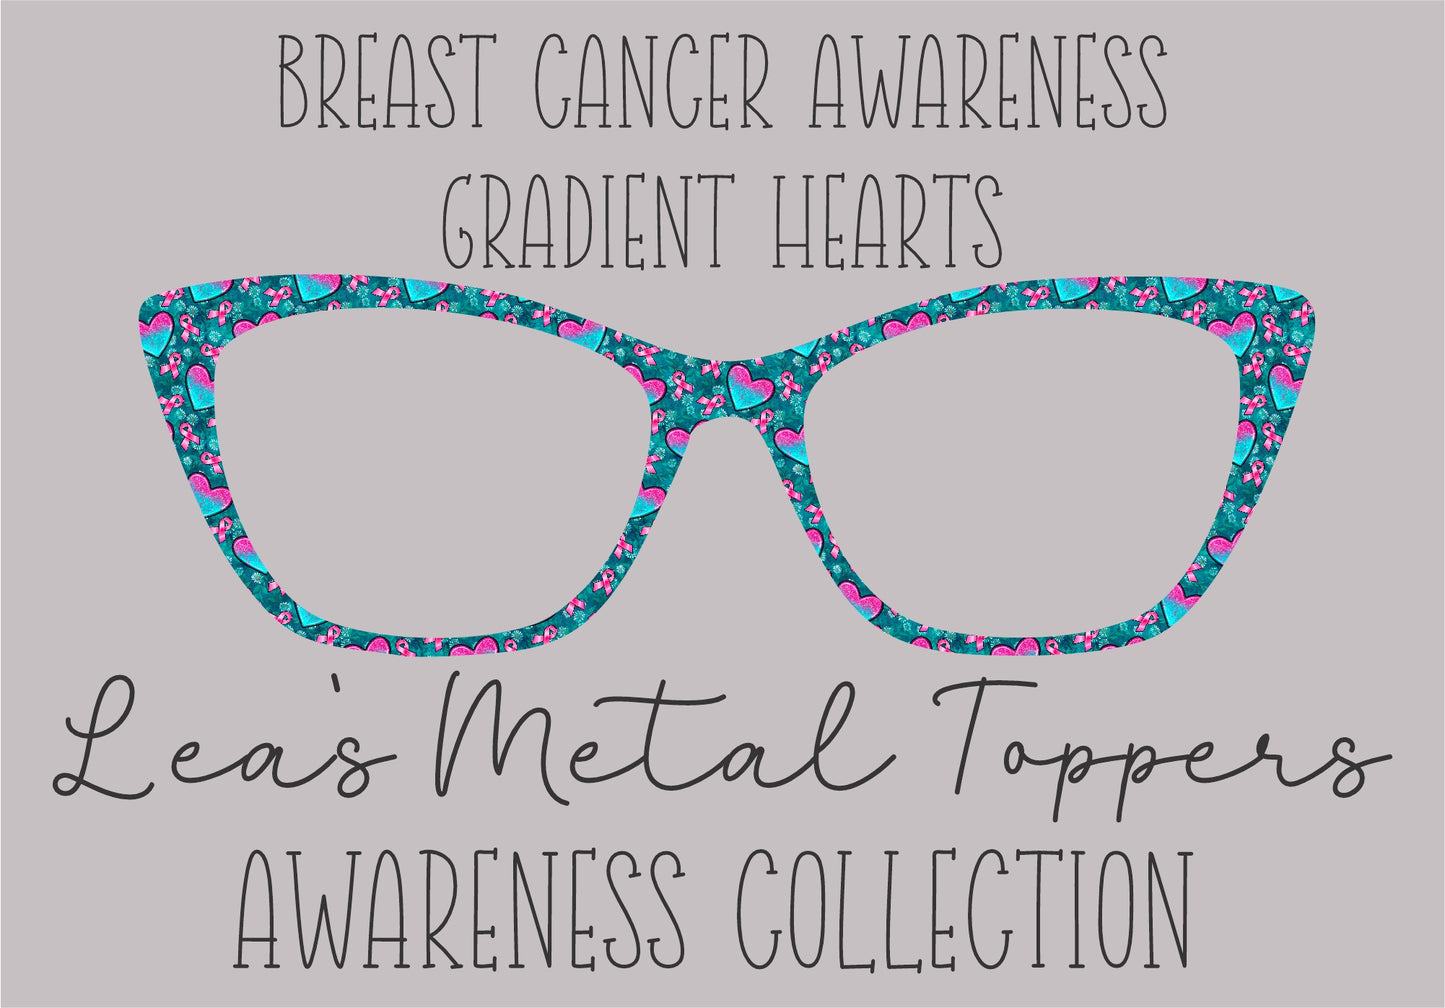 BREAST CANCER AWARNESS GRADIENT HEARTS Eyewear Frame Toppers COMES WITH MAGNETS